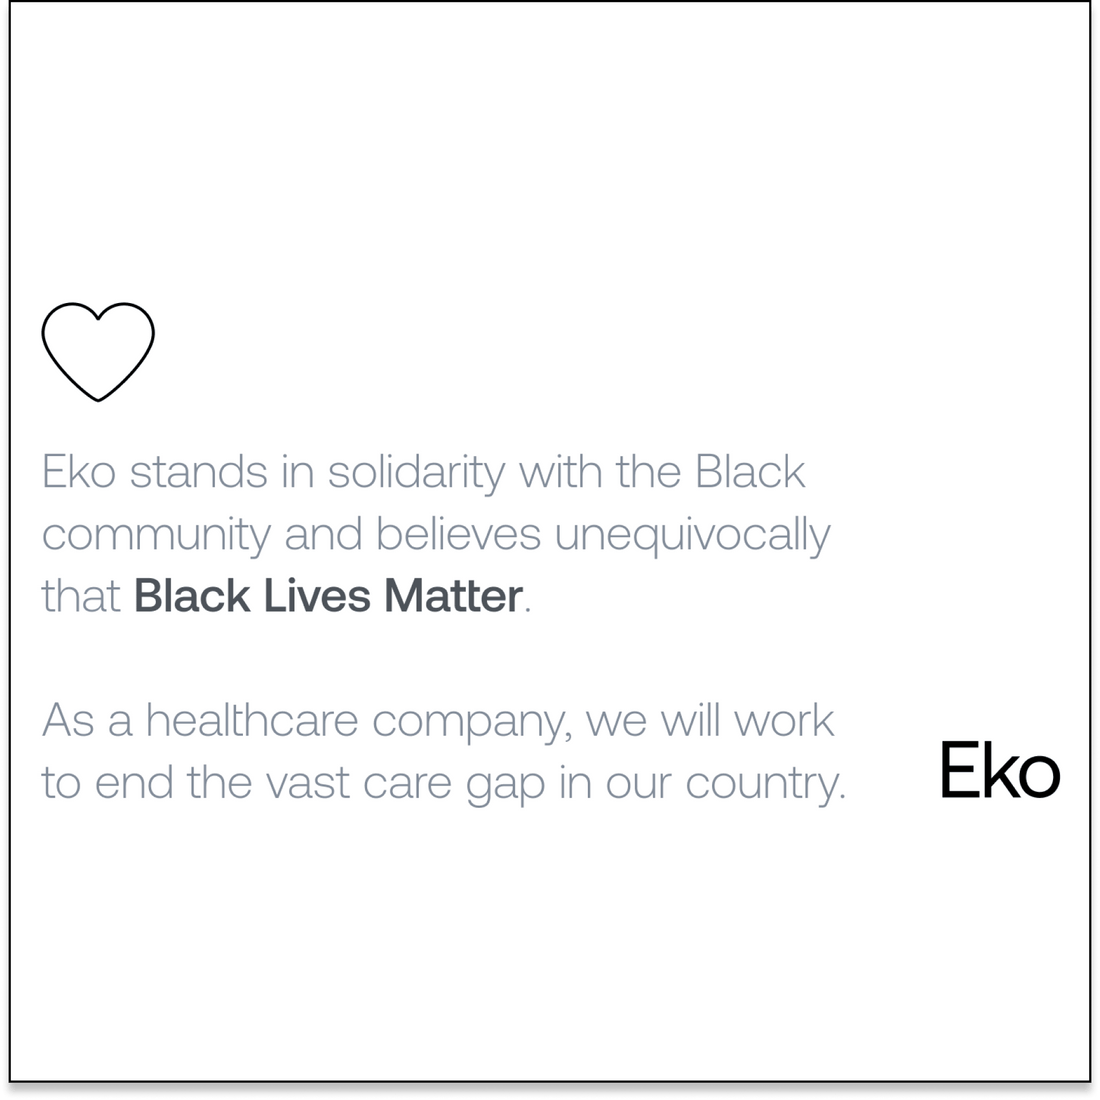 Quote from Eko that  "Eko stands in solidarity with the Black community and believes unequivocally that Black Lives Matter."